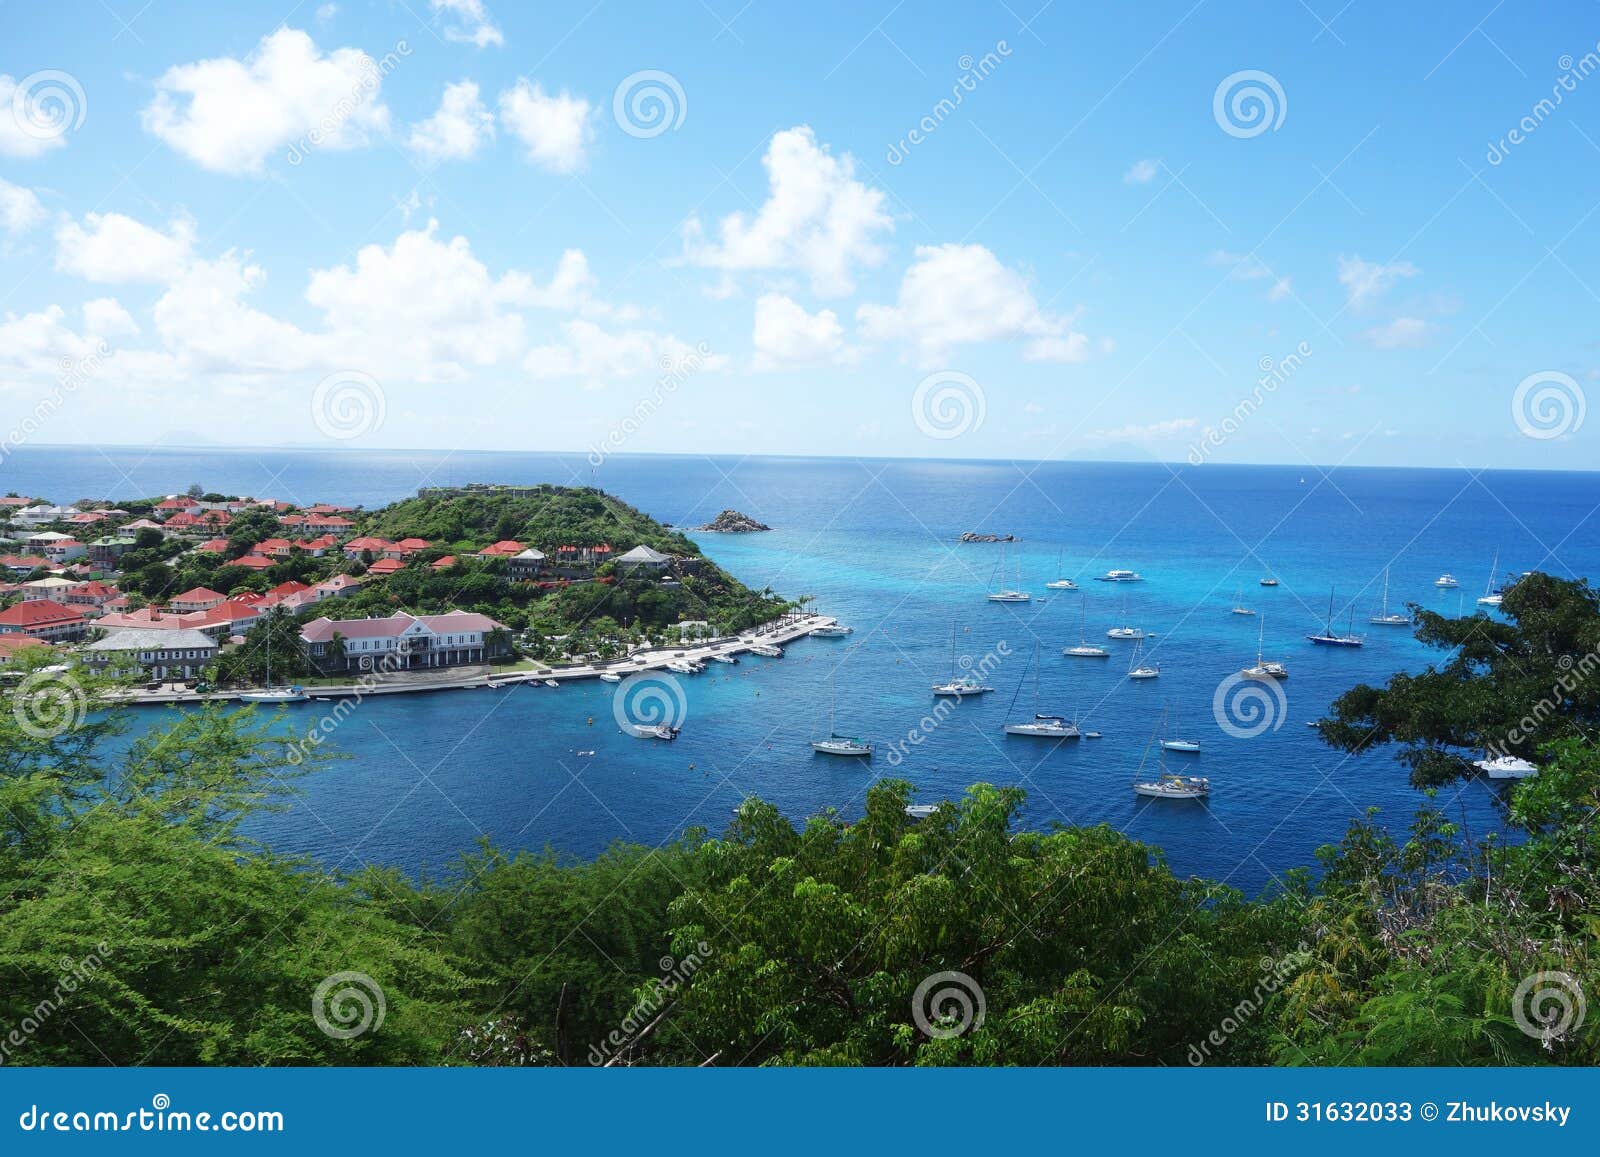 gustavia harbor at st barts, french west indies